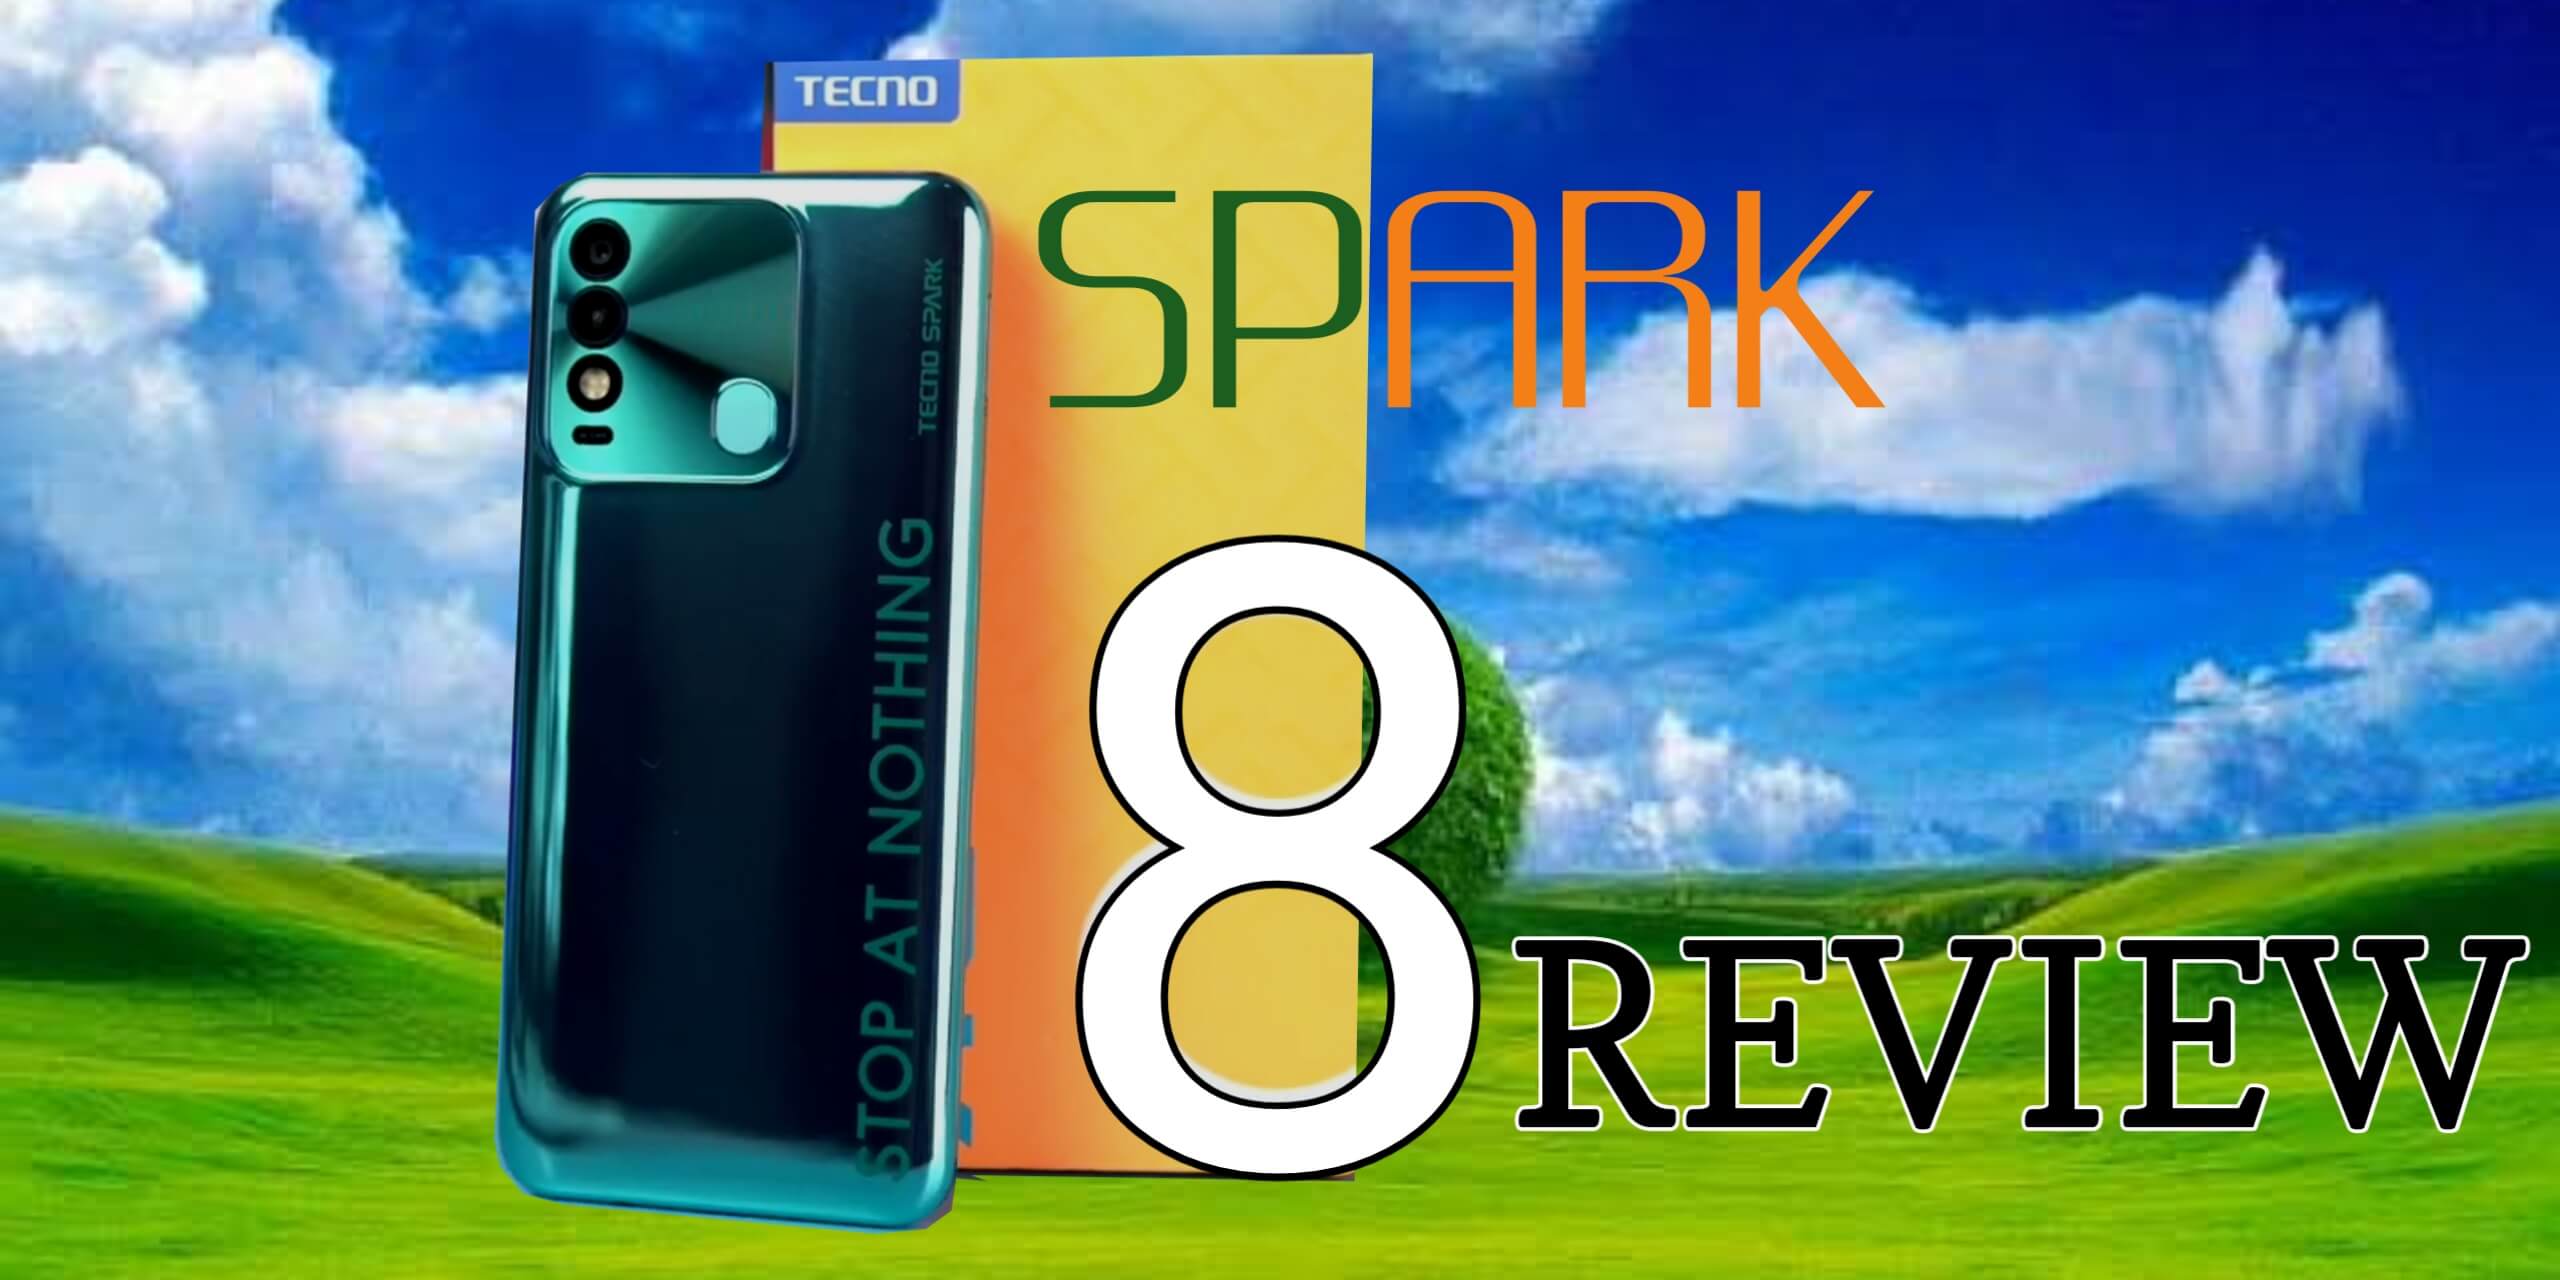 Tecno Spark 8 Review best user opinion